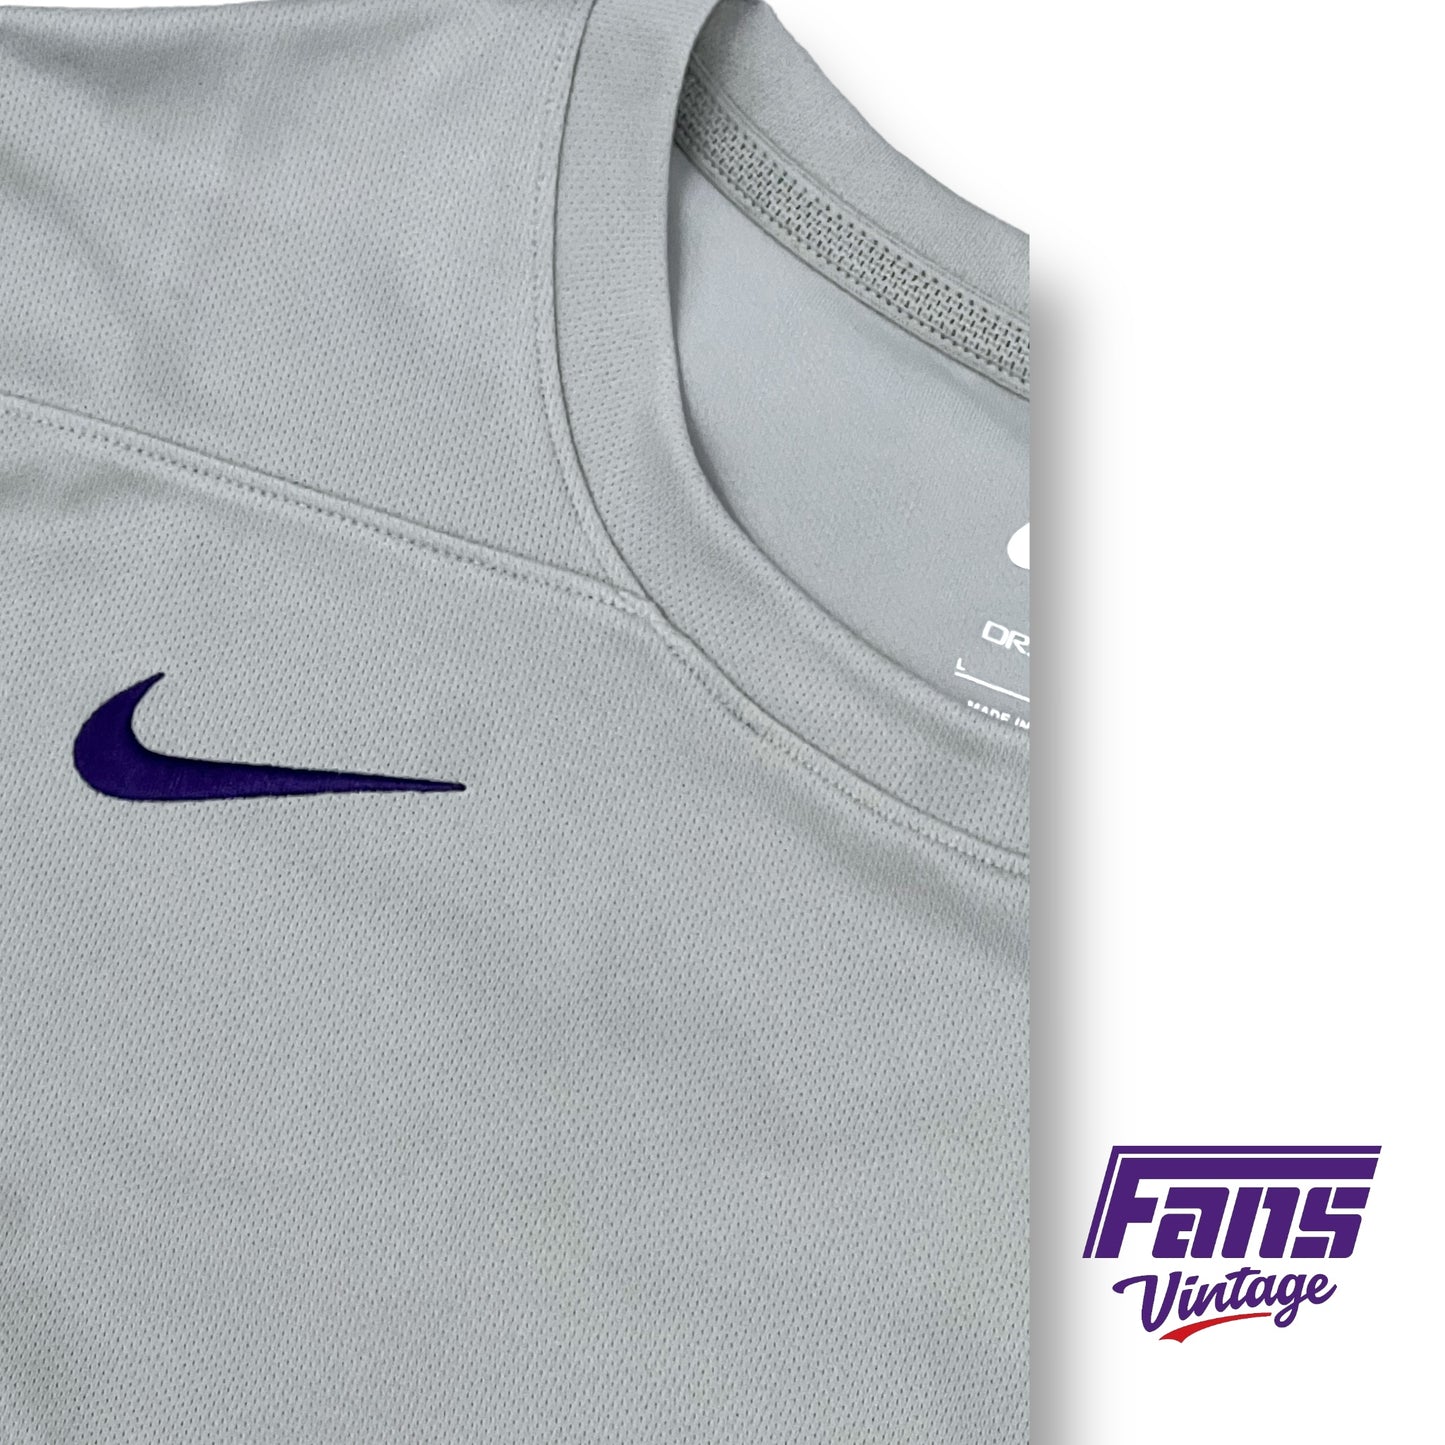 TCU Team Issue Premium Drifit Shirt - Light Gray with embroidered logos